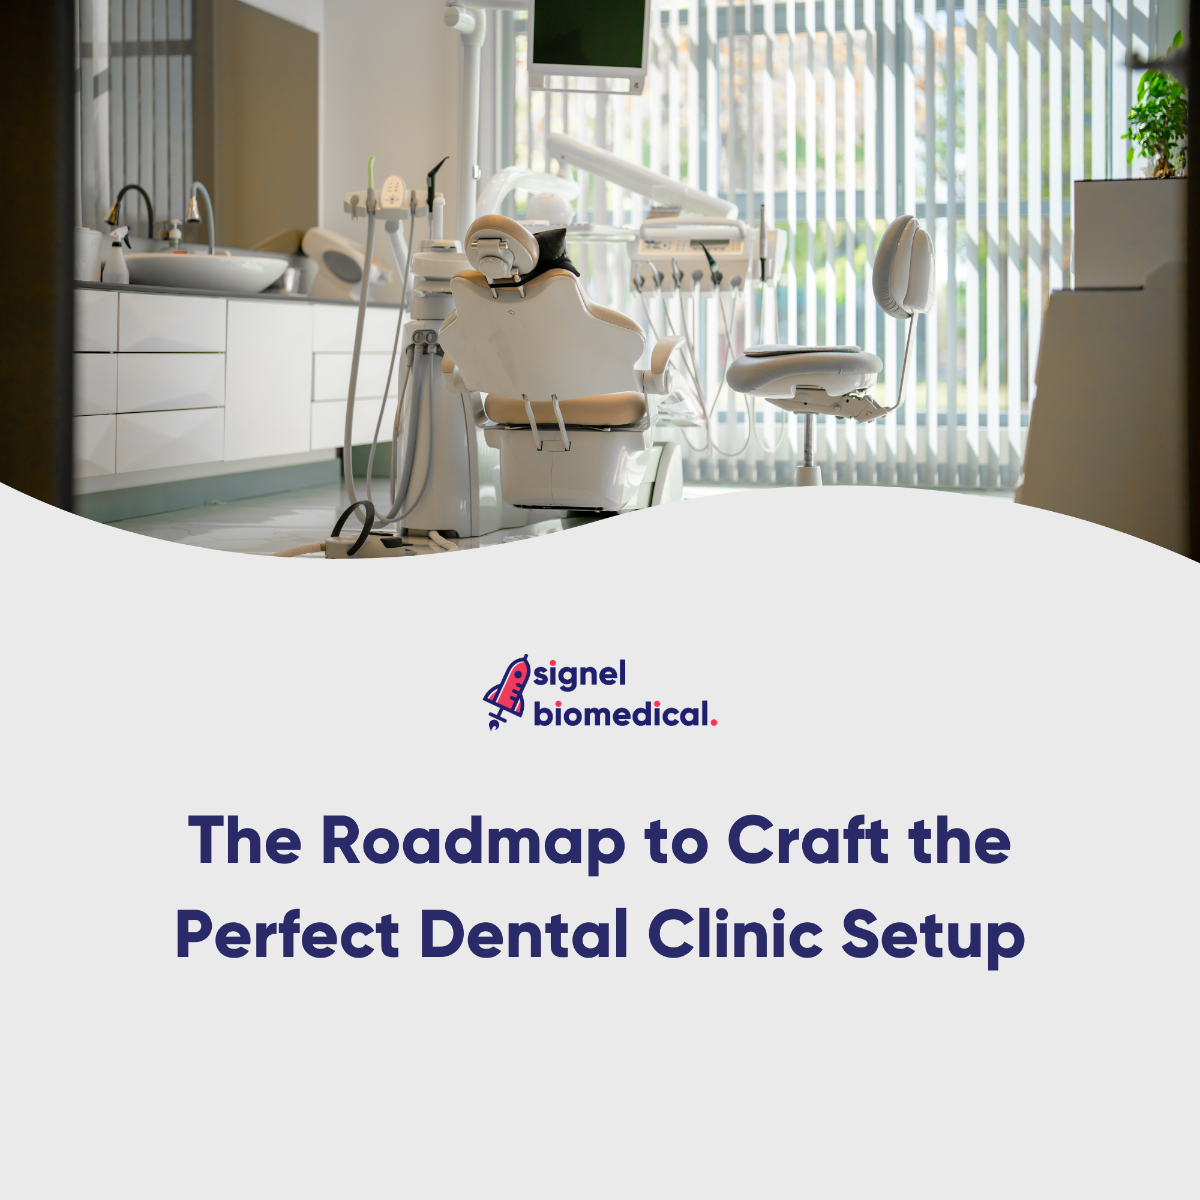 The Roadmap to Craft the Perfect Dental Clinic Setup!